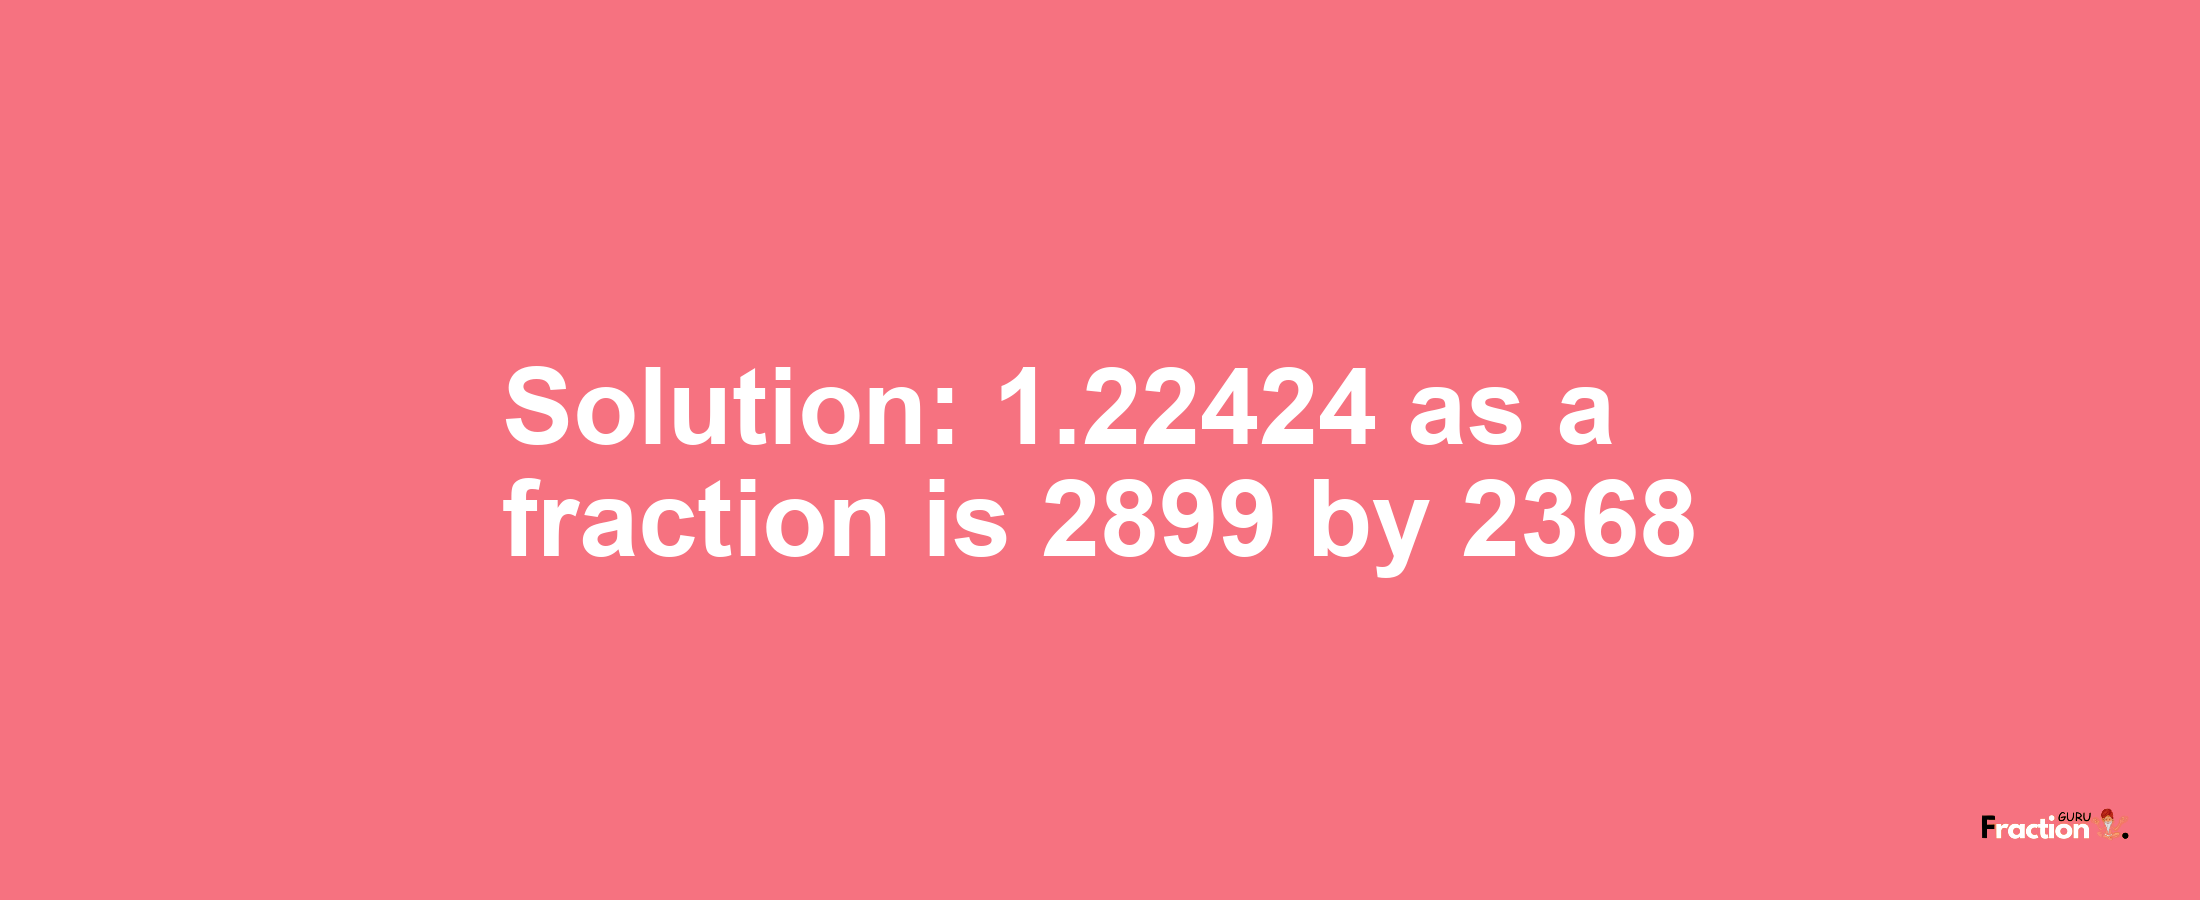 Solution:1.22424 as a fraction is 2899/2368